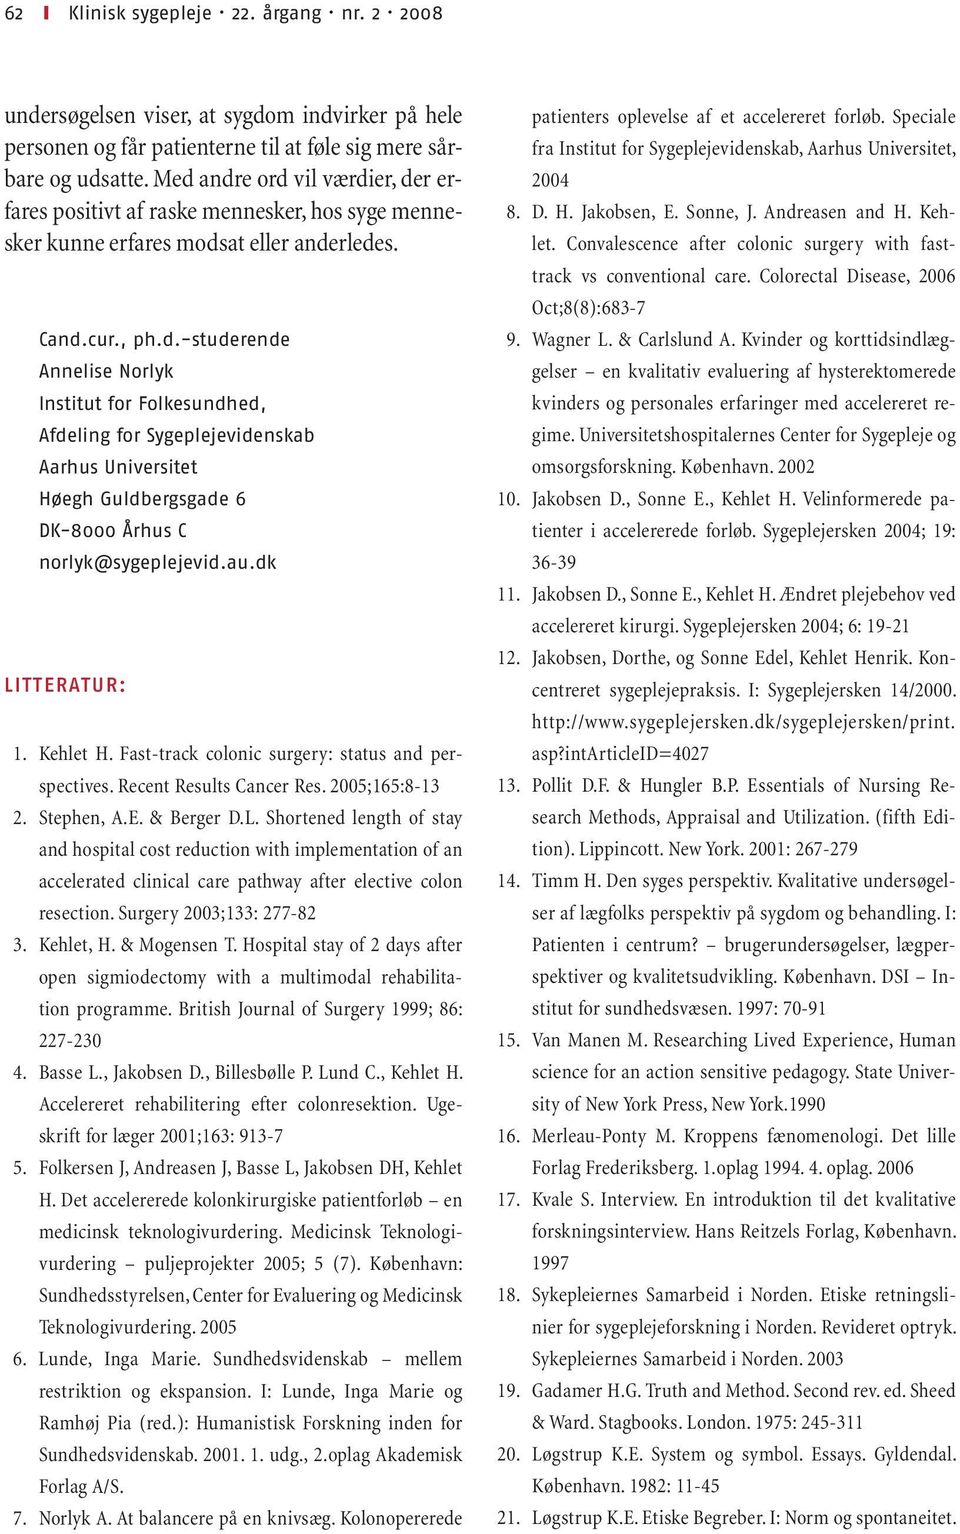 au.dk LITTERATUR: 01. Kehlet H. Fast-track colonic surgery: status and perspectives. Recent Results Cancer Res. 2005;165:8-13 02. Stephen, A.E. & Berger D.L. Shortened length of stay and hospital cost reduction with implementation of an accelerated clinical care pathway after elective colon resection.